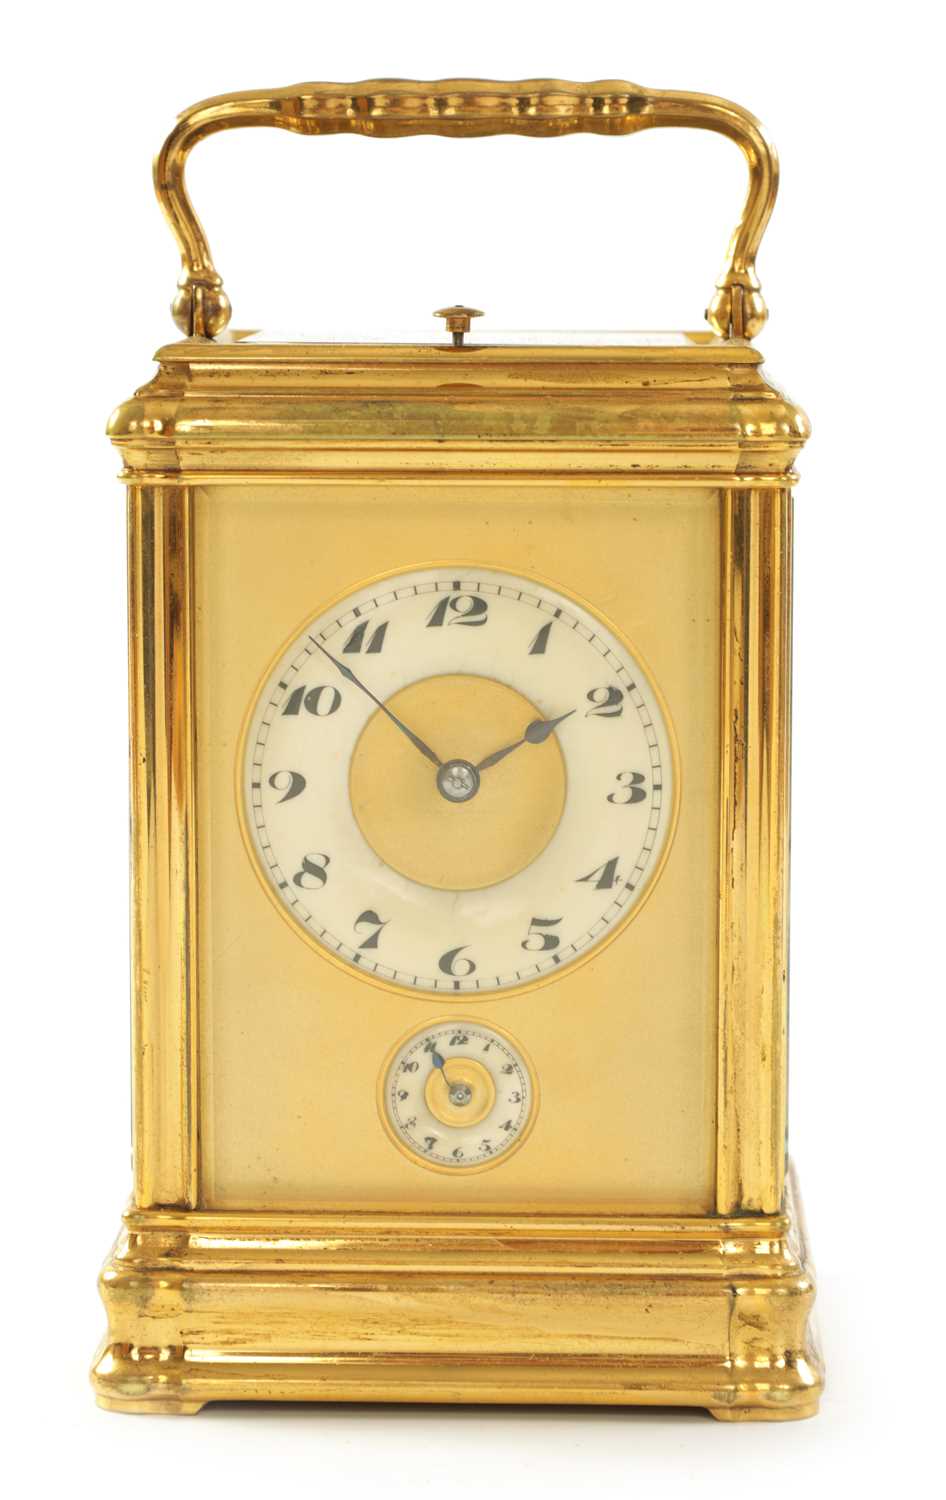 Lot 8 - A LATE 19TH CENTURY FRENCH GORGE CASE GRAND SONNERIE CARRIAGE CLOCK